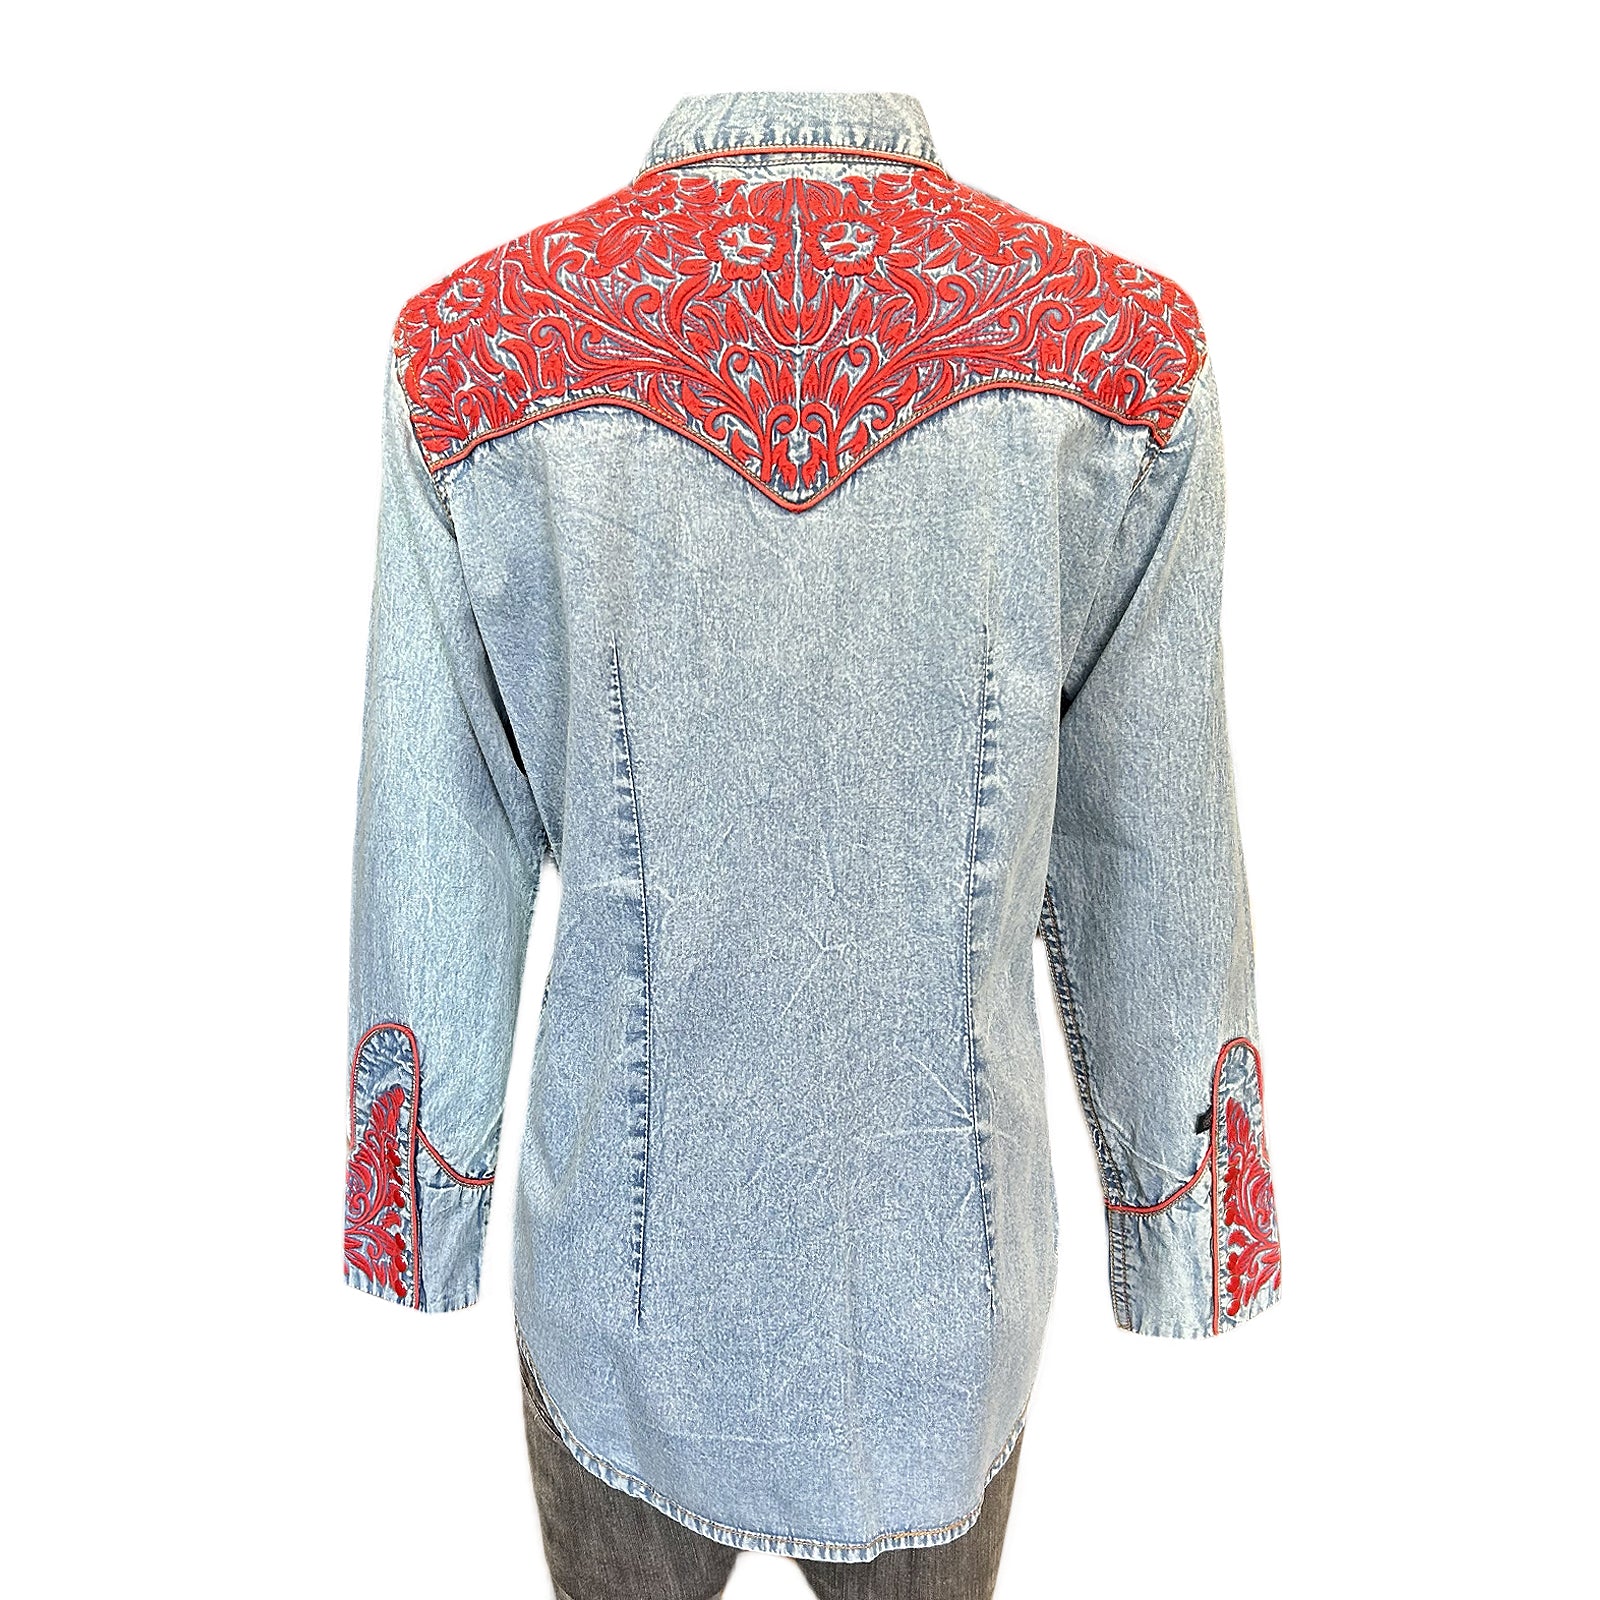 Women's Vintage Tooling Embroidery Denim & Red Western Shirt